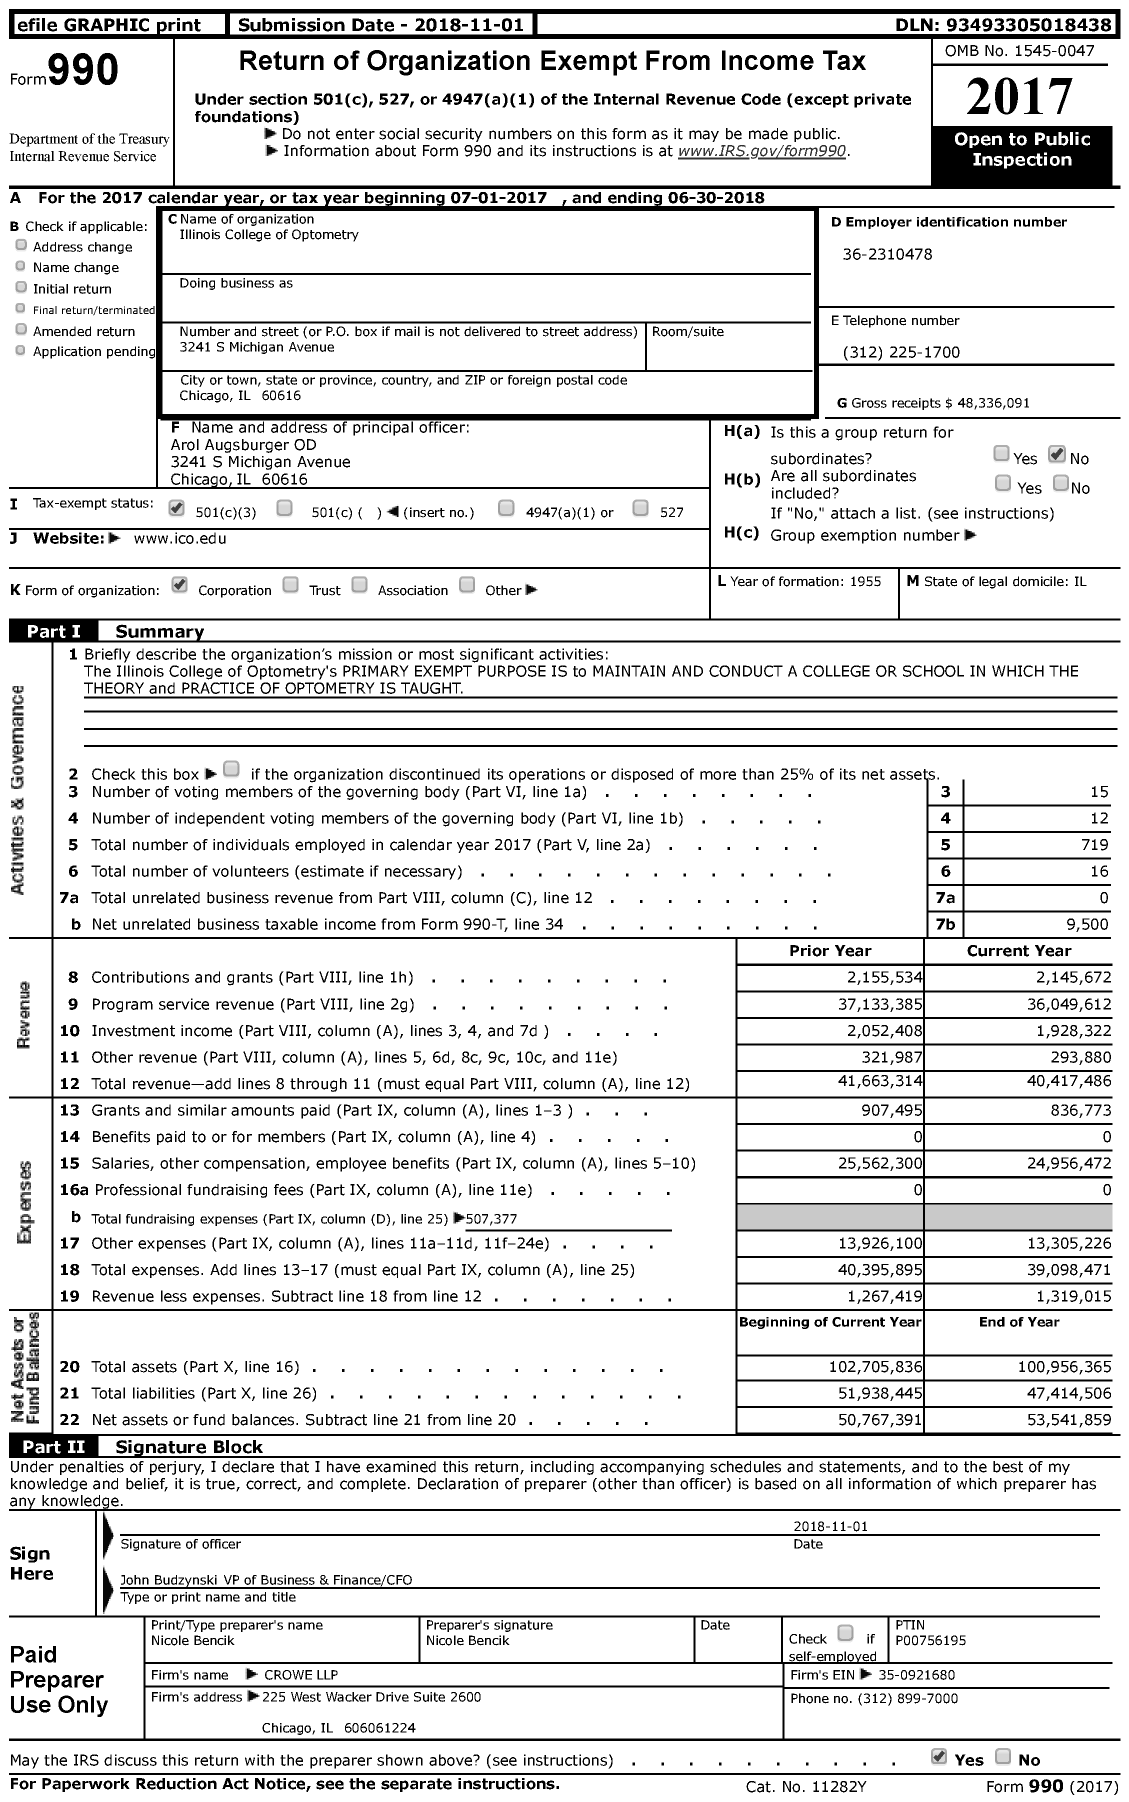 Image of first page of 2017 Form 990 for Illinois College of Optometry (ICO)